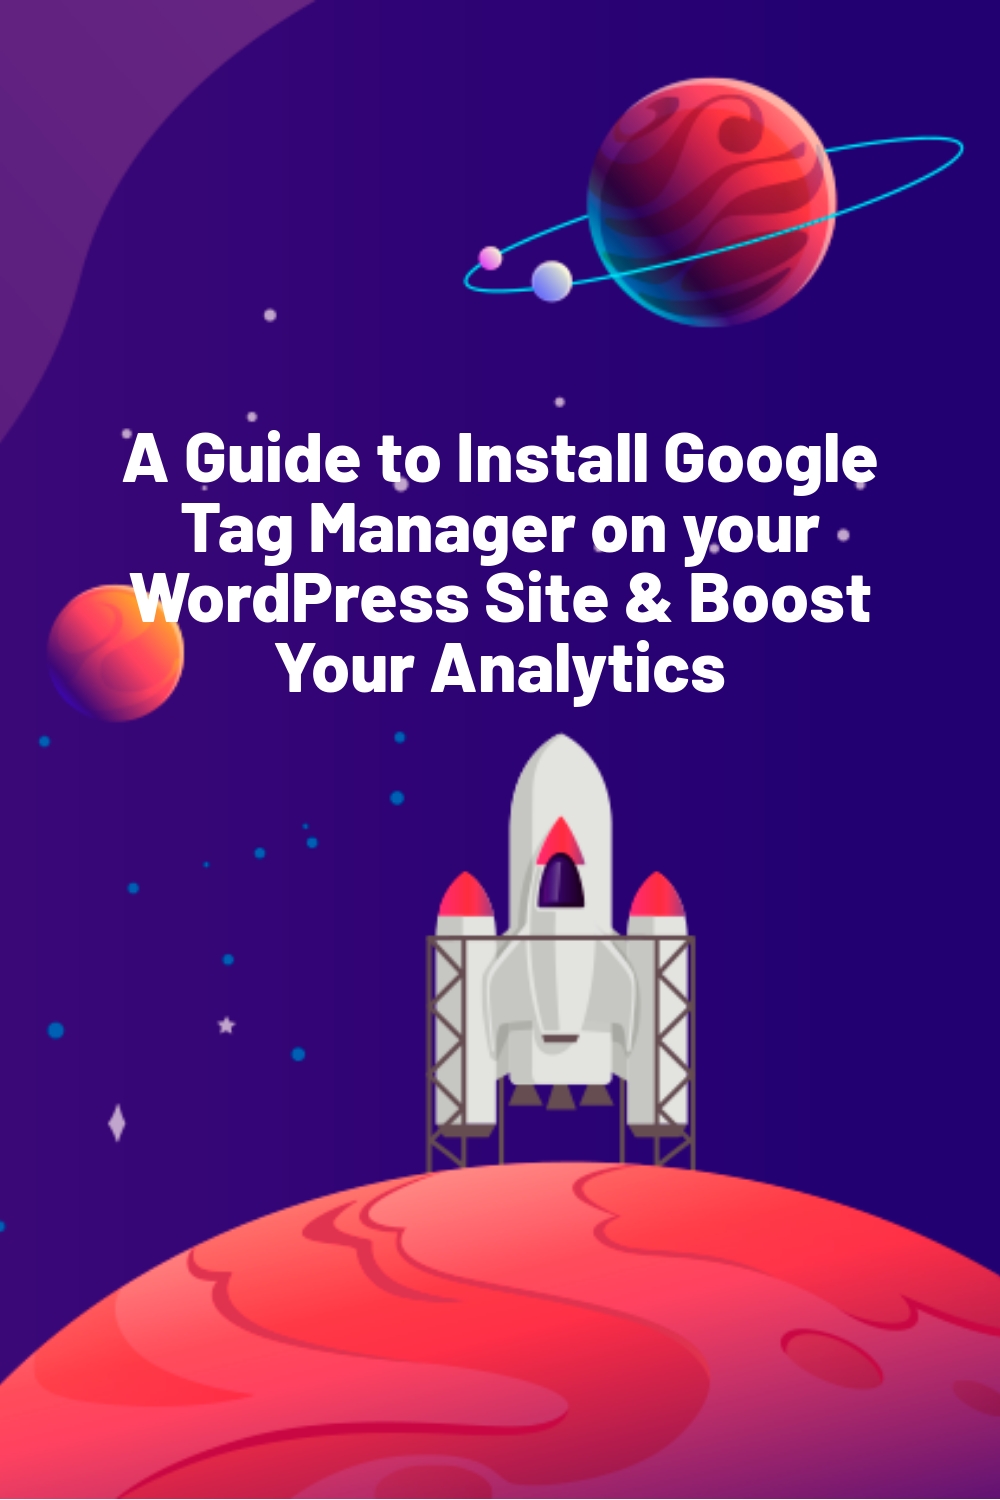 A Guide to Install Google Tag Manager on your WordPress Site & Boost Your Analytics